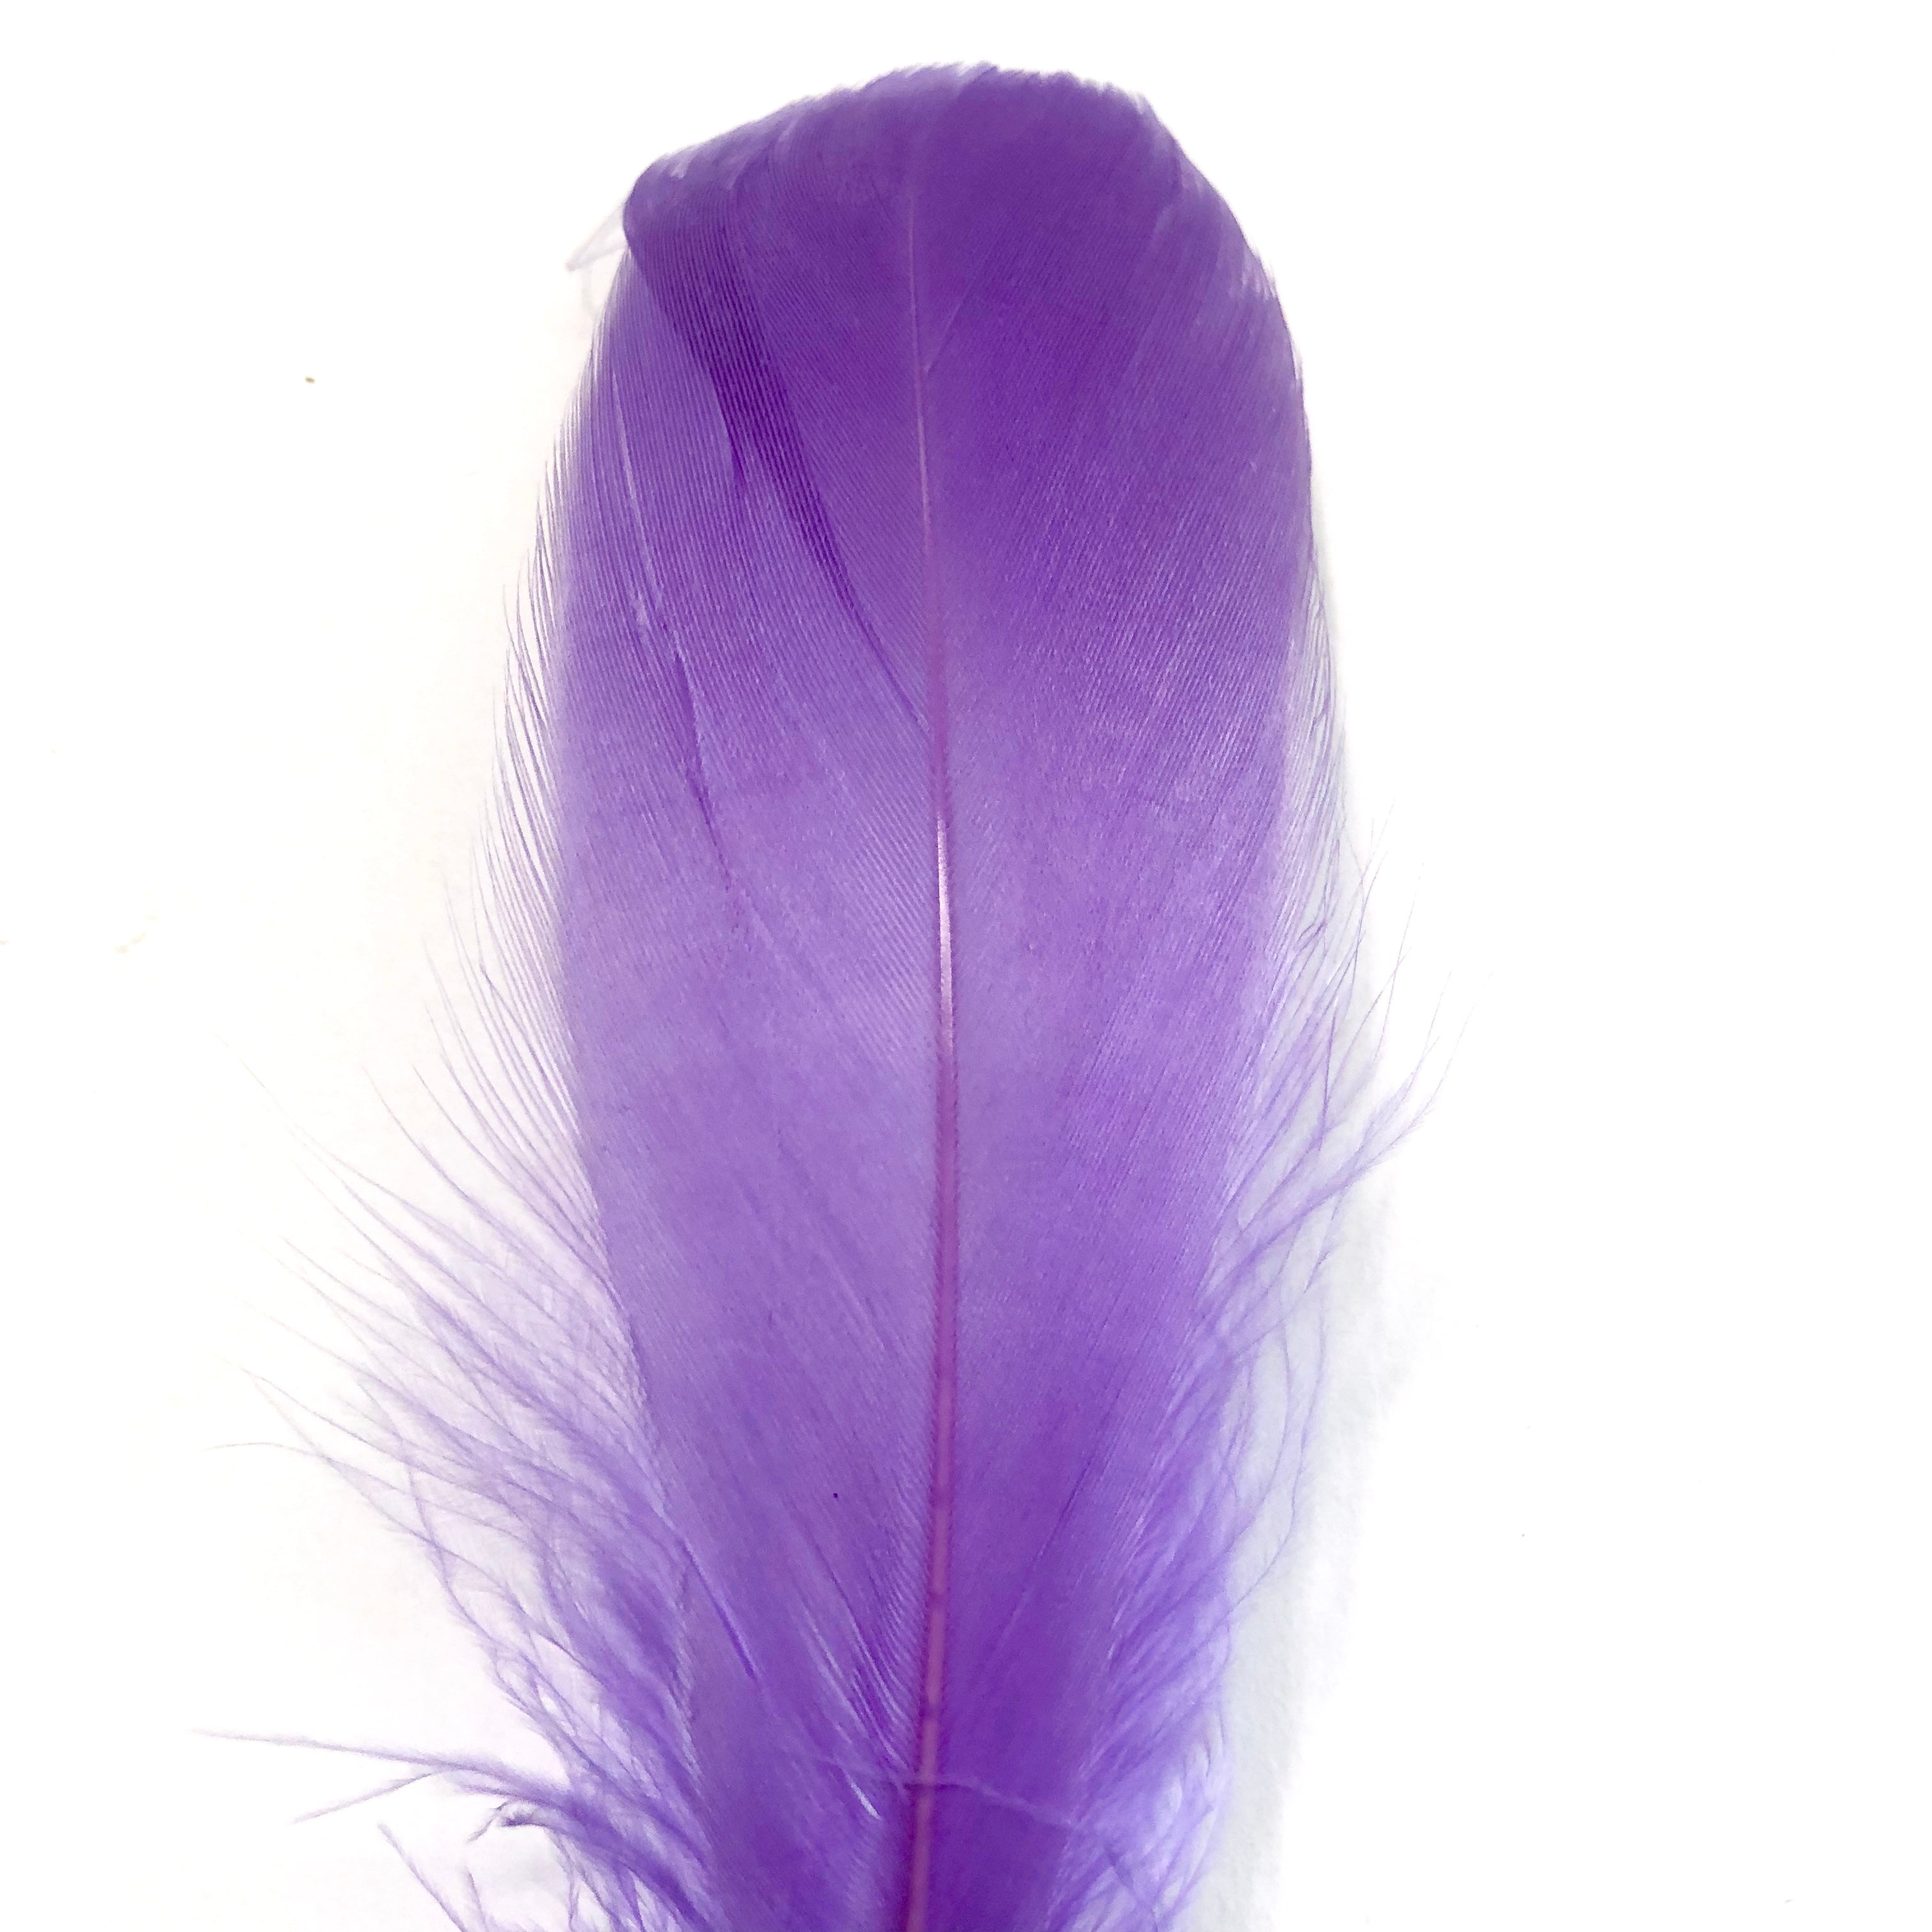 Goose Nagoire Feathers 10 grams - Purple